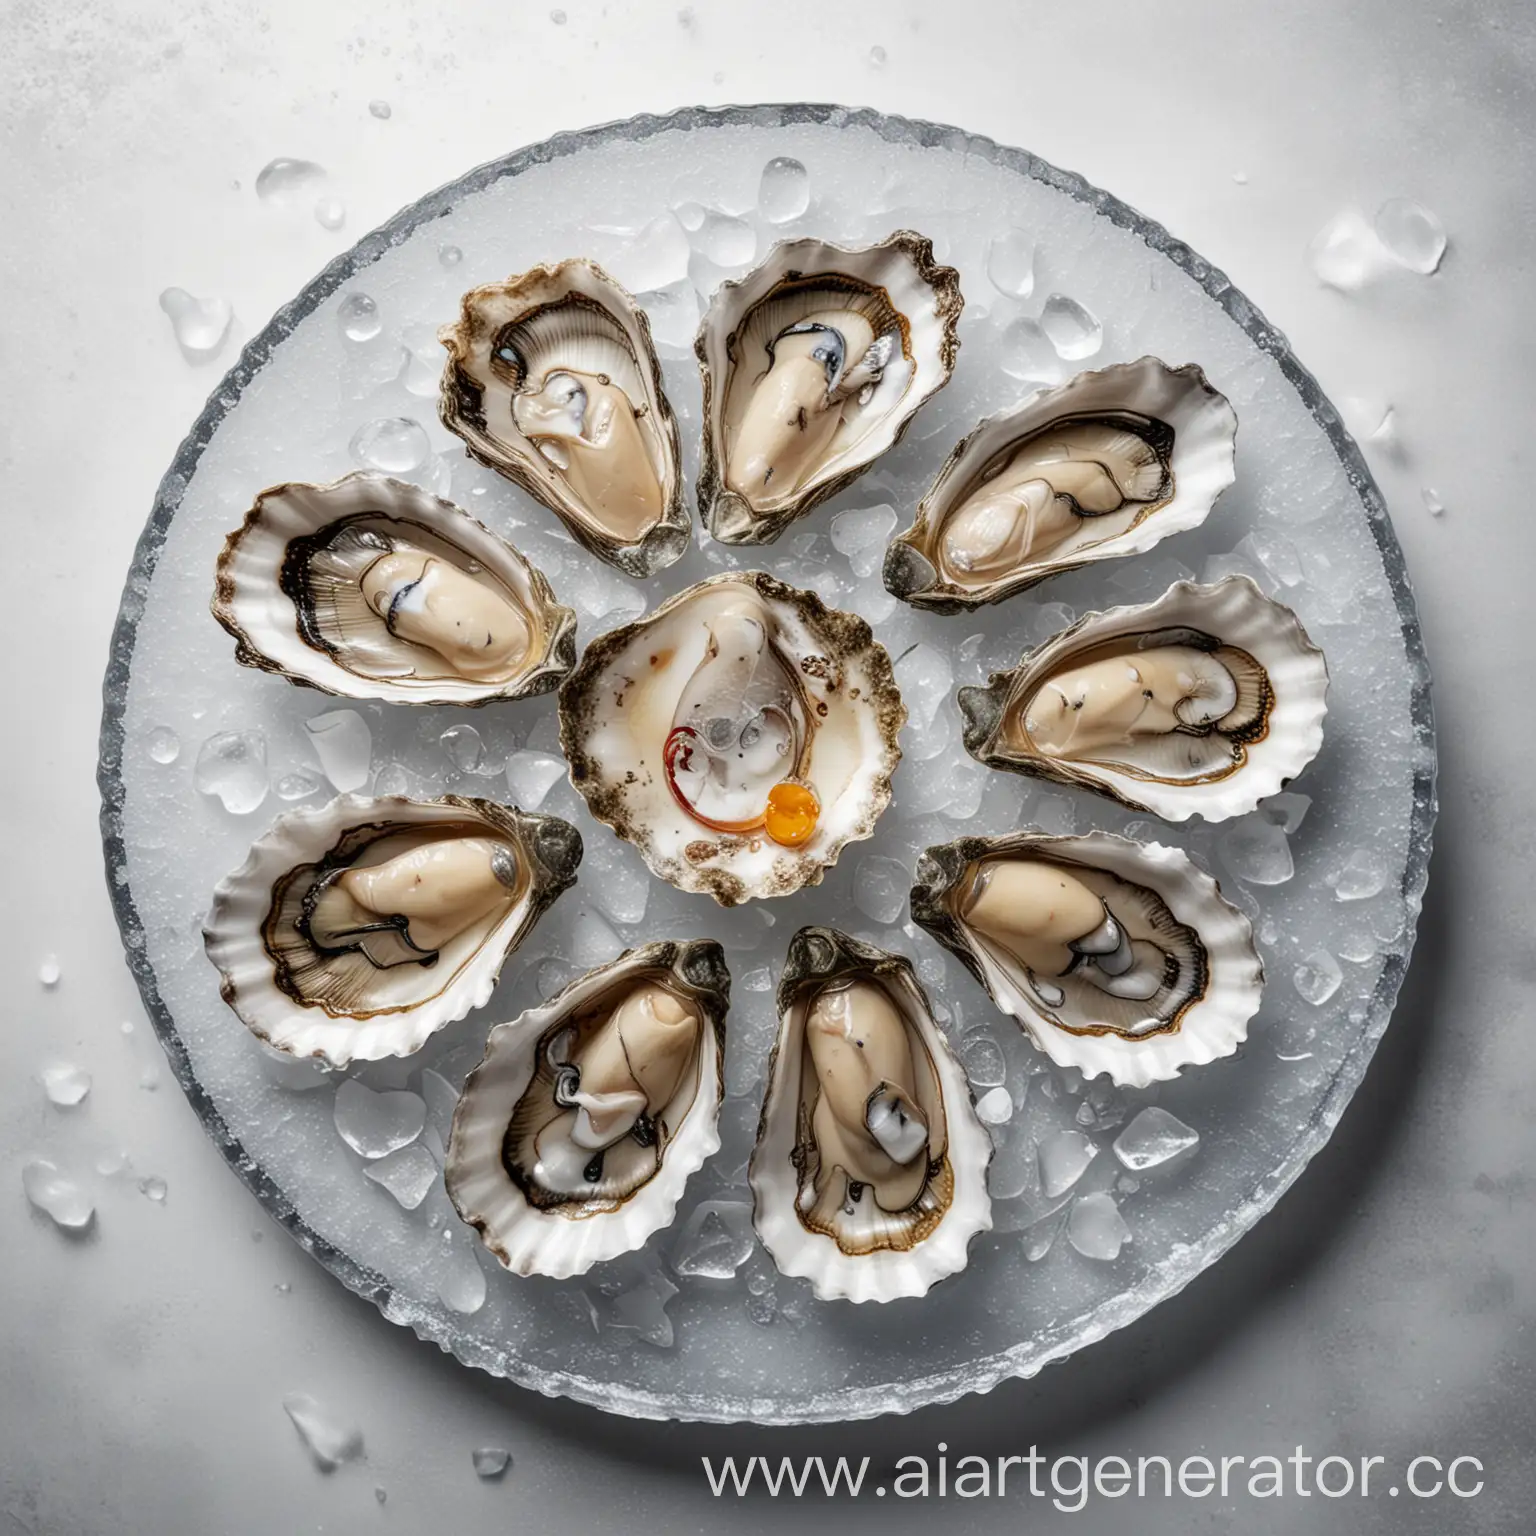 Fresh-Oysters-on-Ice-Gourmet-Seafood-Platter-on-White-Background